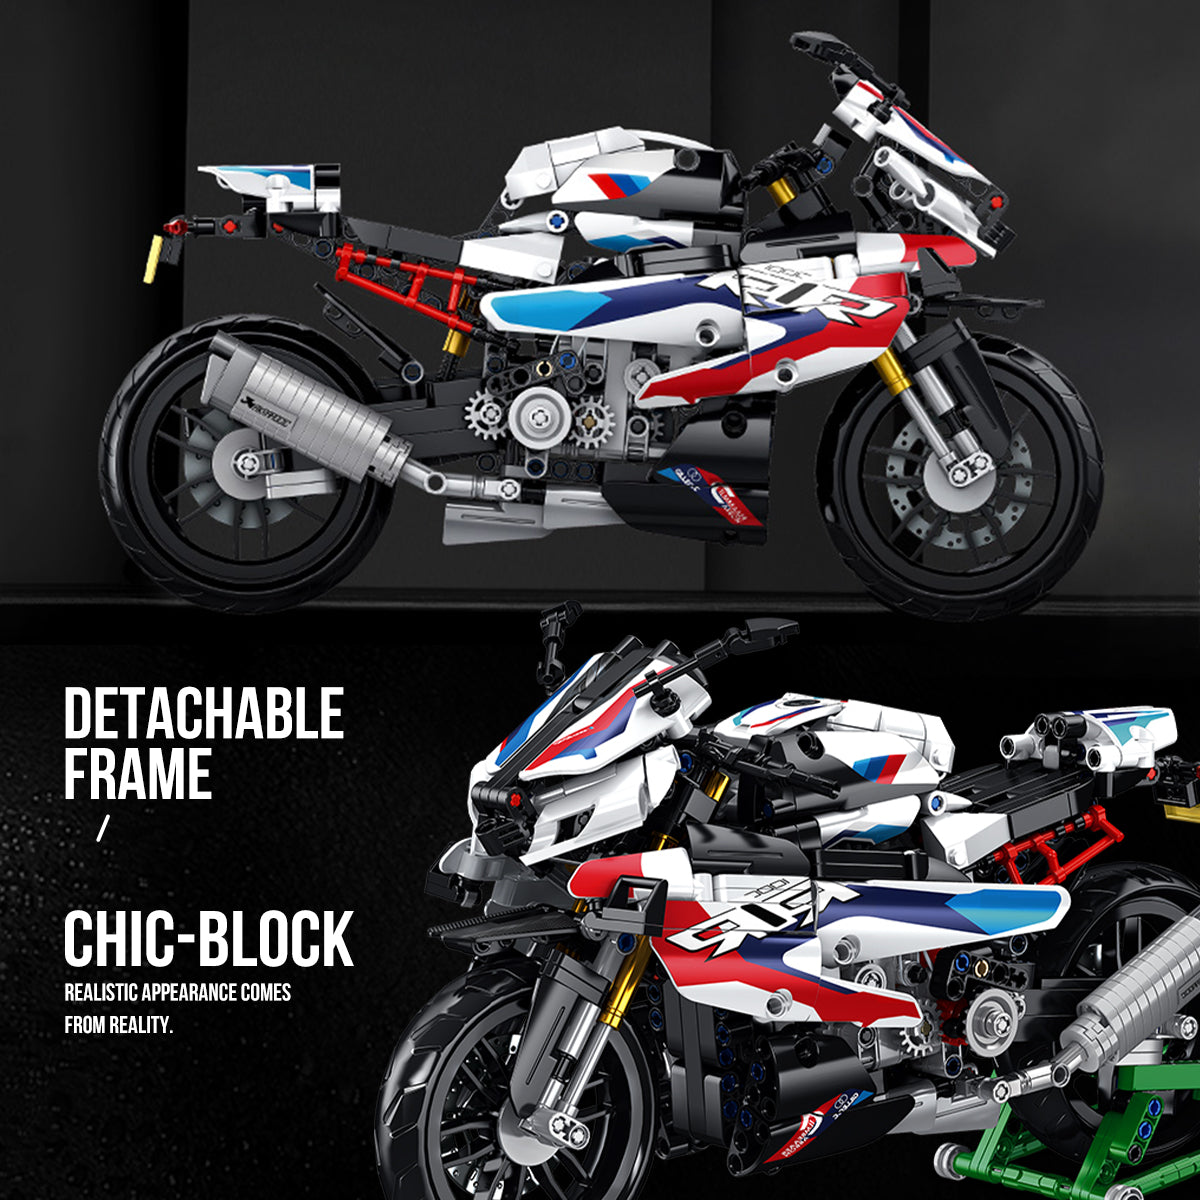 DAHONPA BMW Motorcycle 1000 RR Model Building Blocks Set, 912 Pieces Bricks, MOC Toys as Gift for Kids or Adult